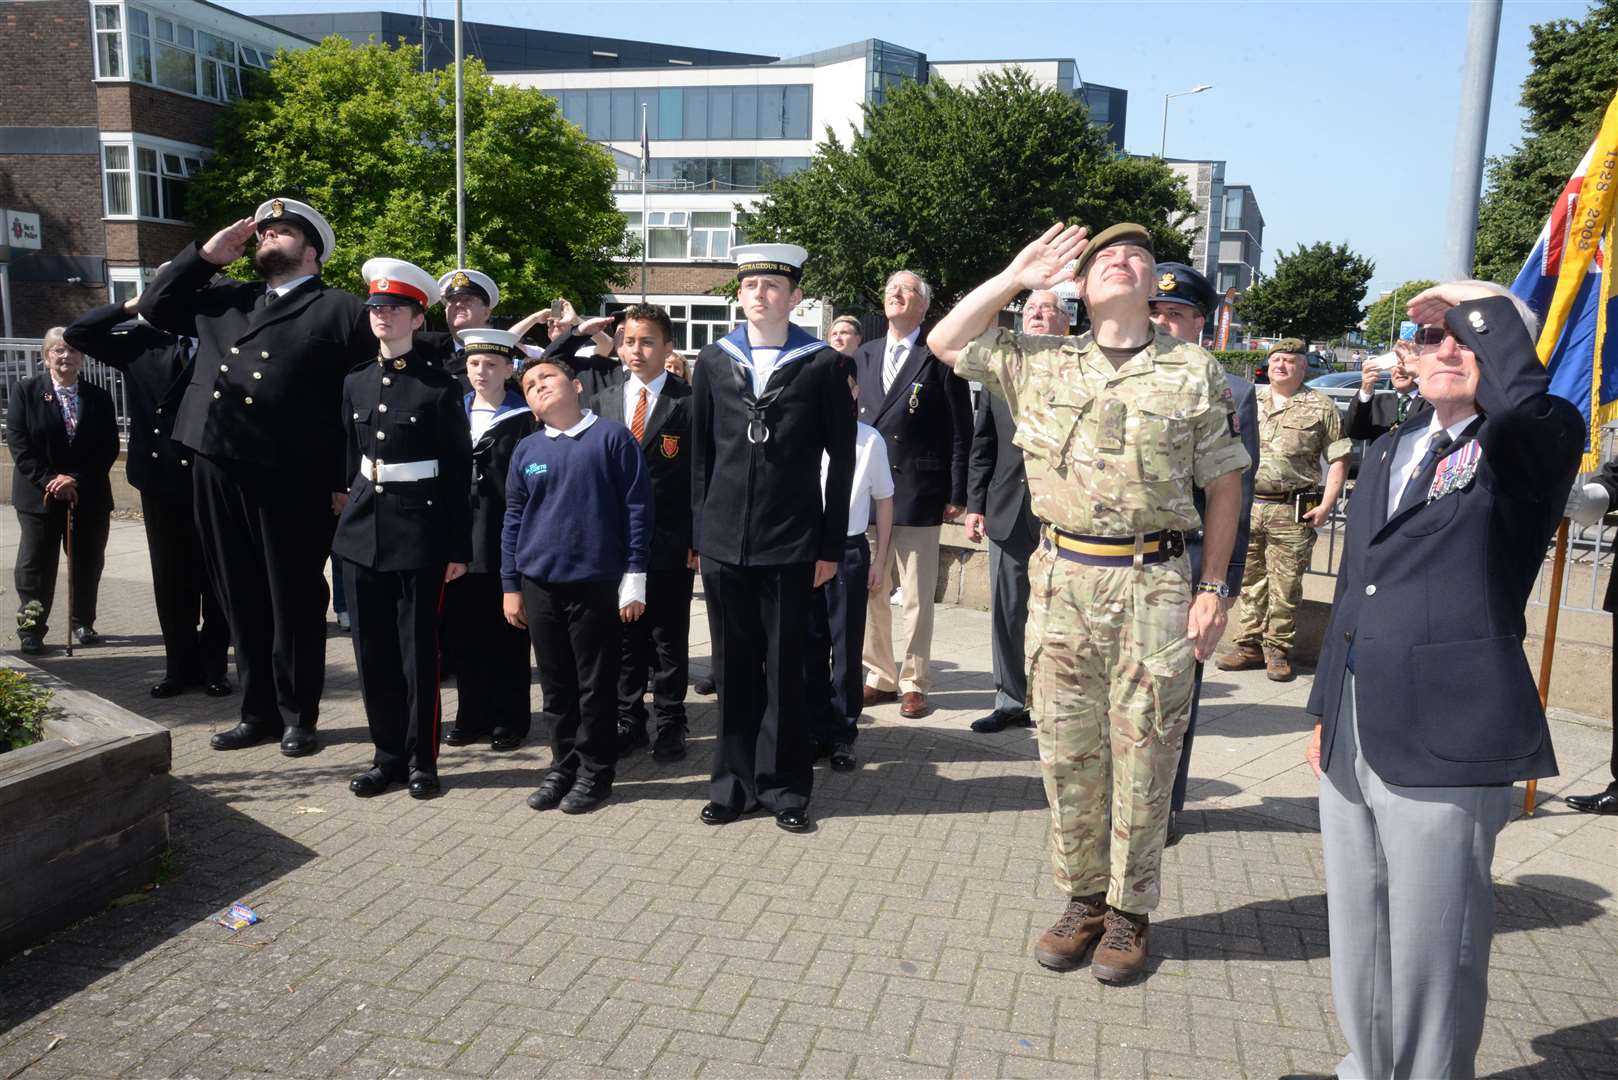 Those present as the Armed Forces Day flag was raised at Canterbury Fire Station on Saturday. Picture: Chris Davey. (13154133)